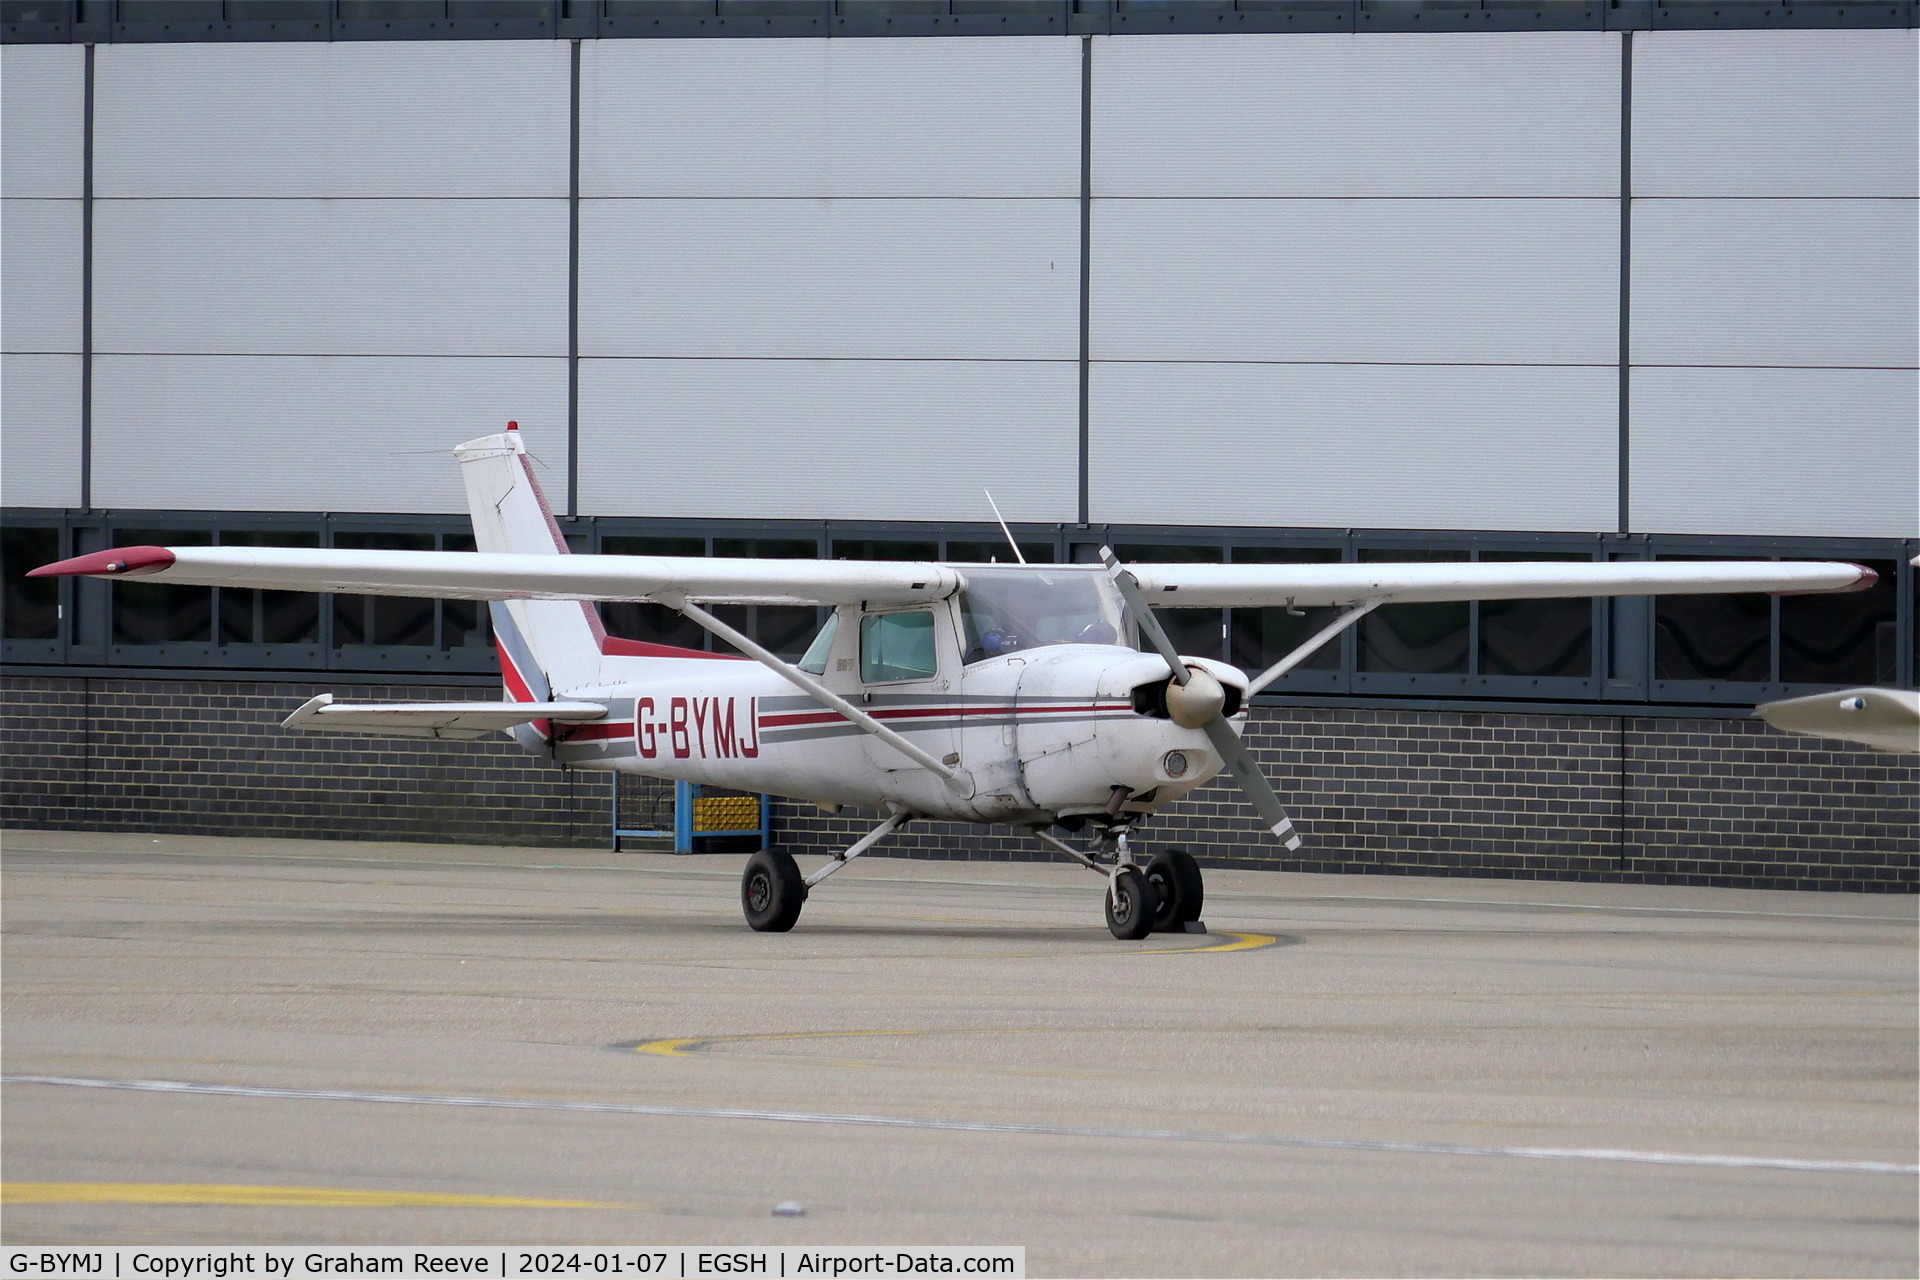 G-BYMJ, 1982 Cessna 152 C/N 152-85564, Parked at Norwich.